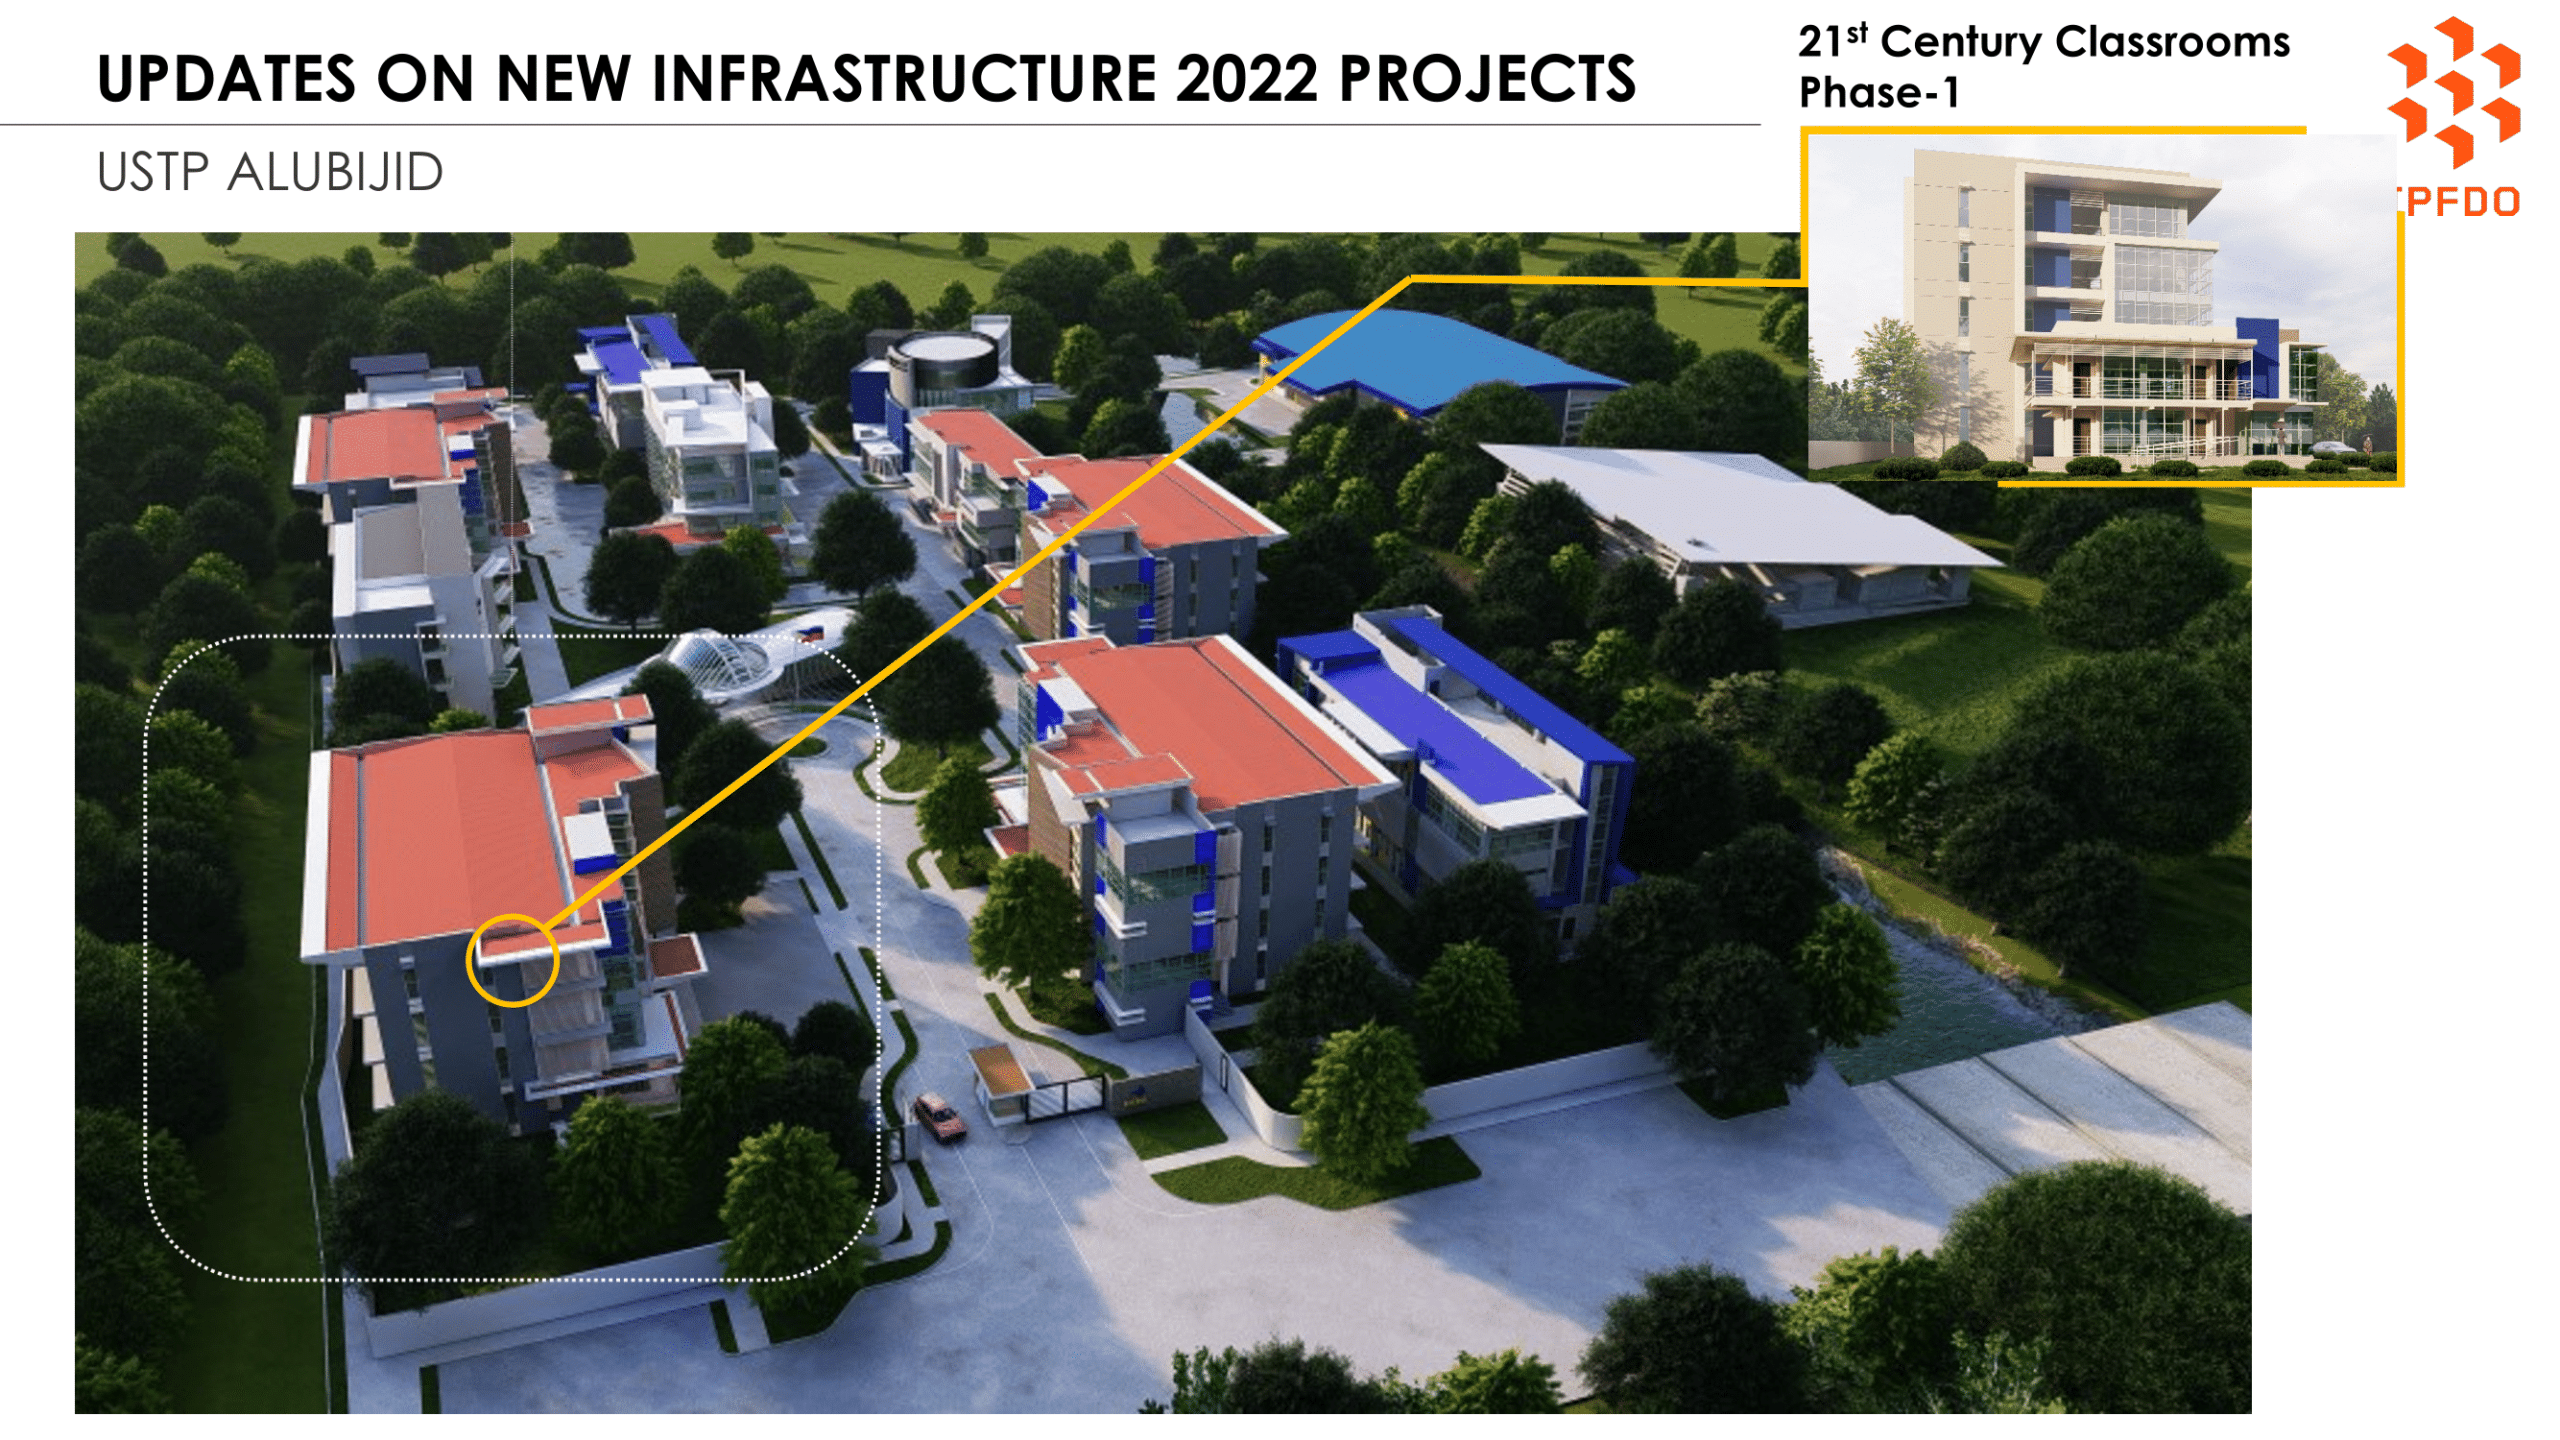 Updates on New Infrastructure 2022 Projects - USTP Alubijid